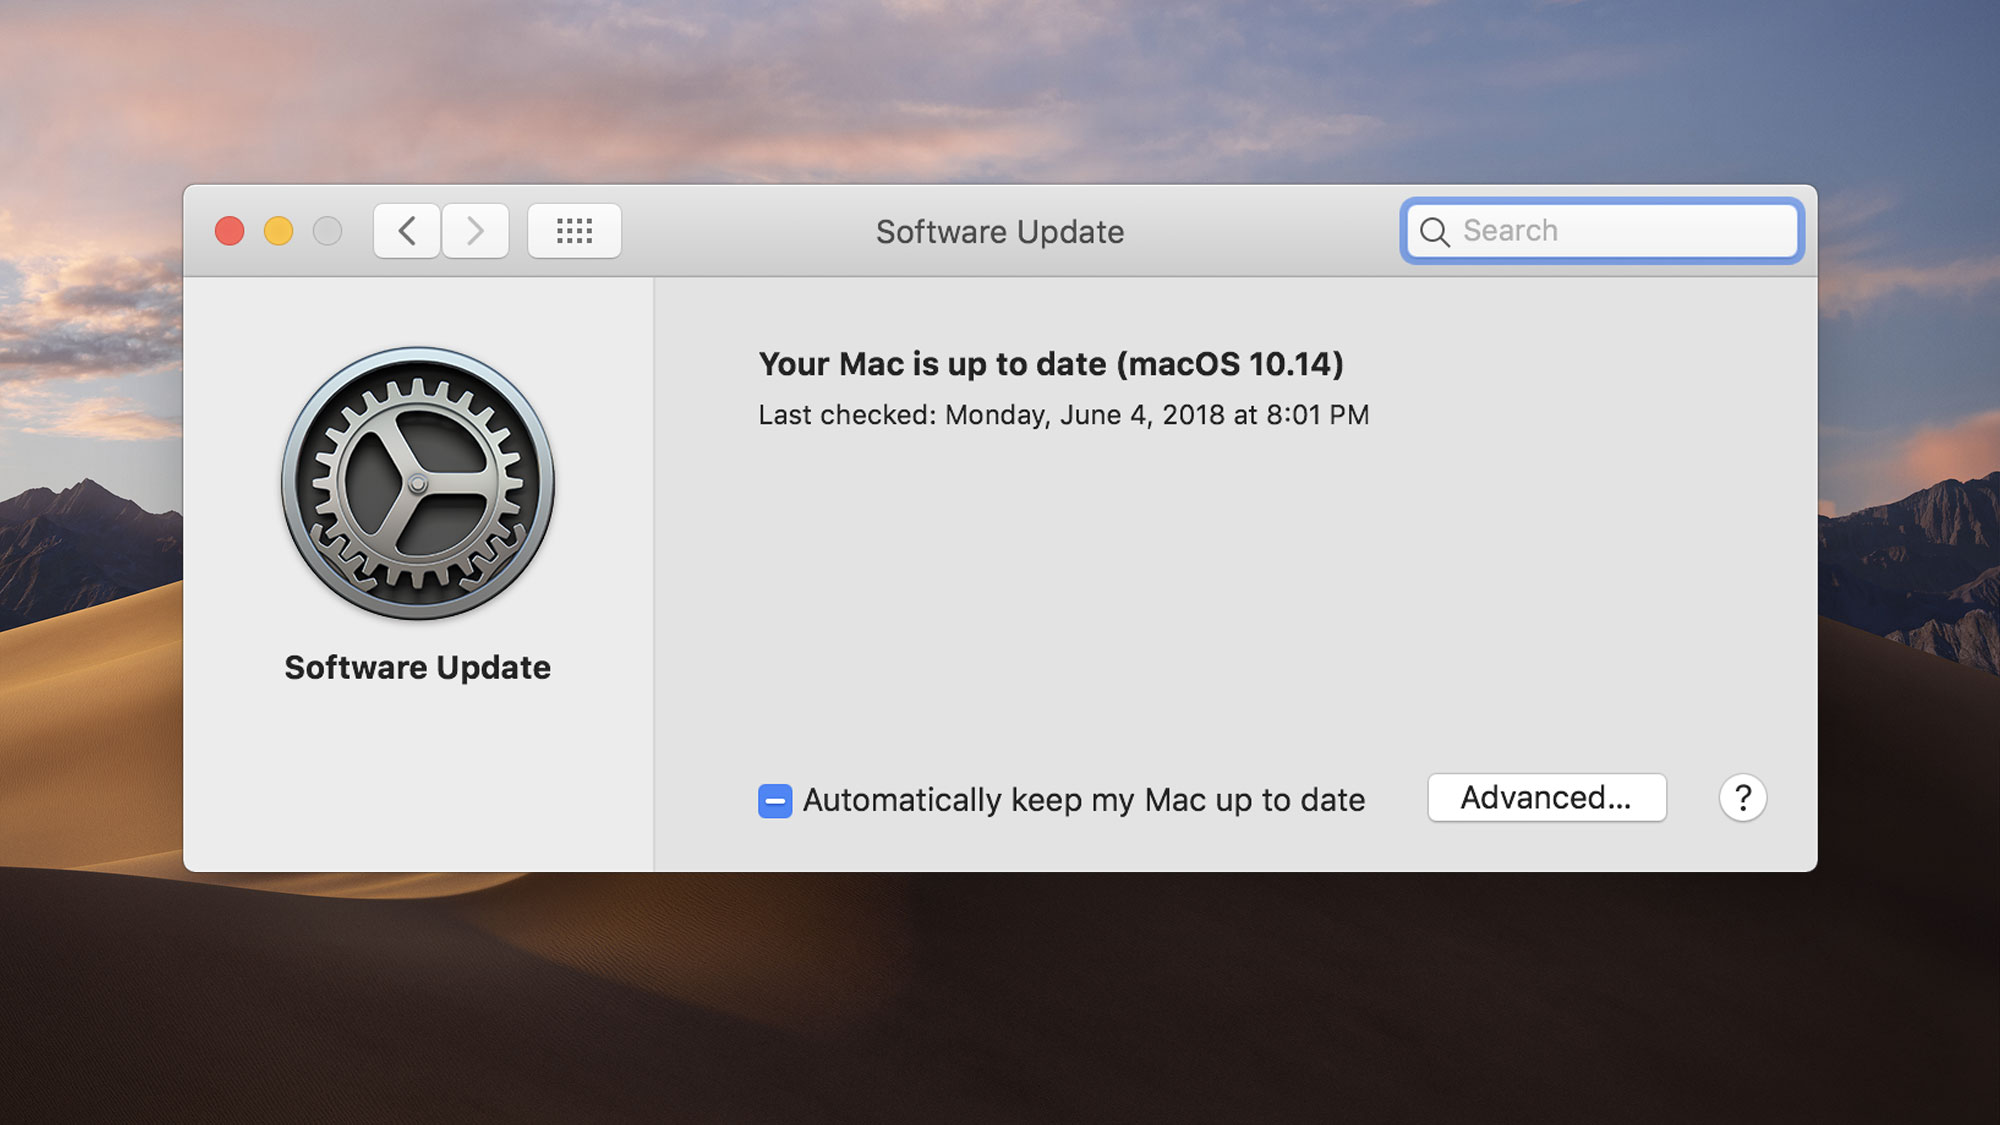 Mac os x software update downloaded file location